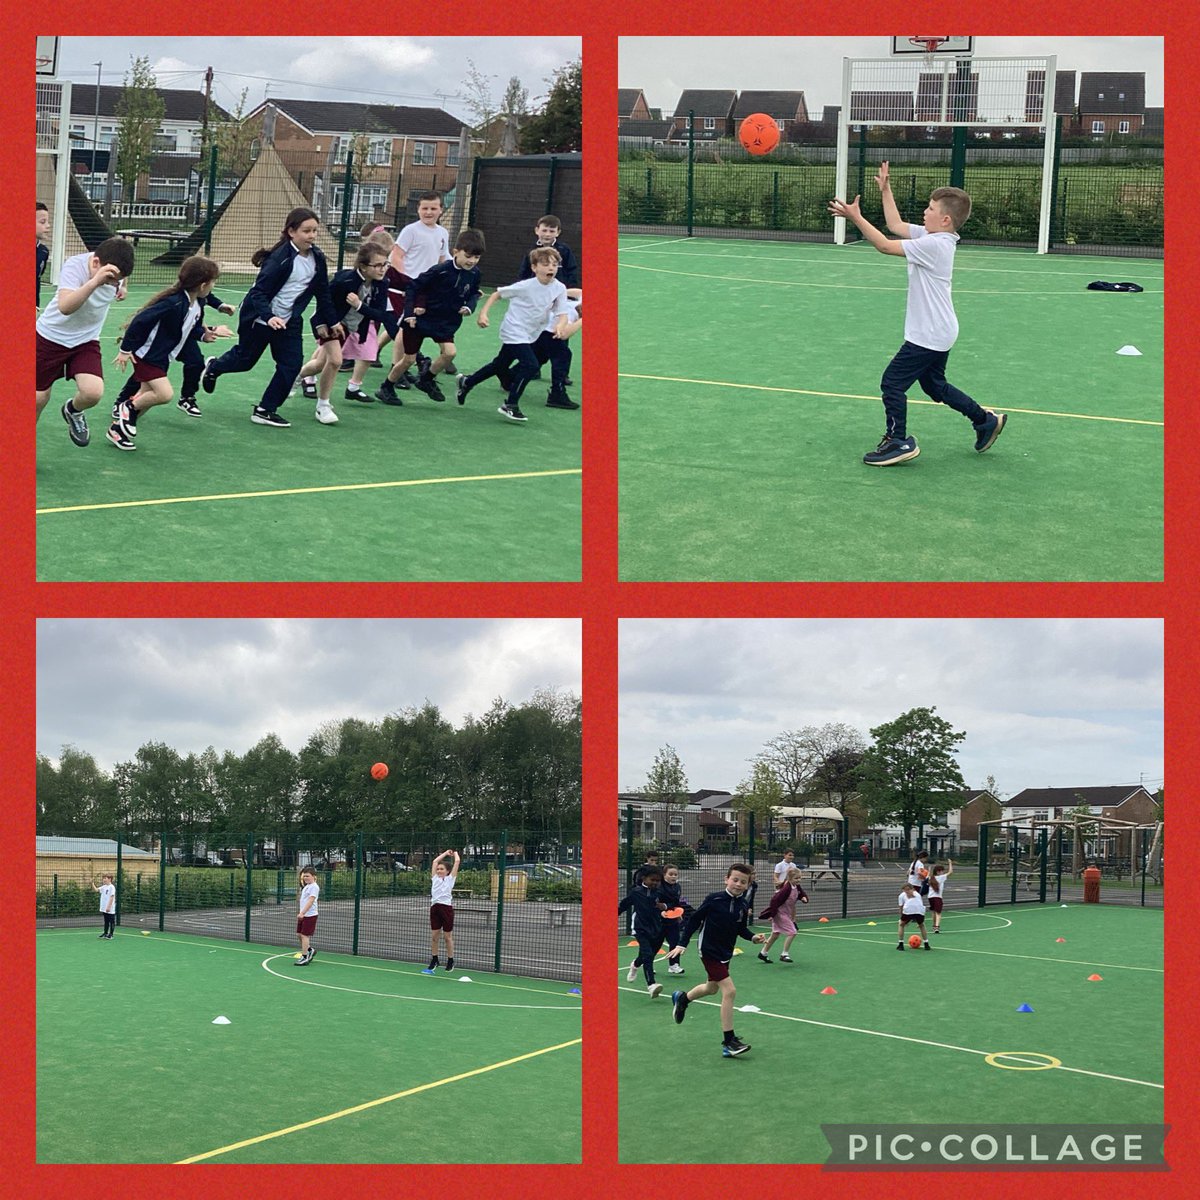 @Year4RobyPark Today in PE our aim was to develop power and technique when throwing for distance. Well done year 4!